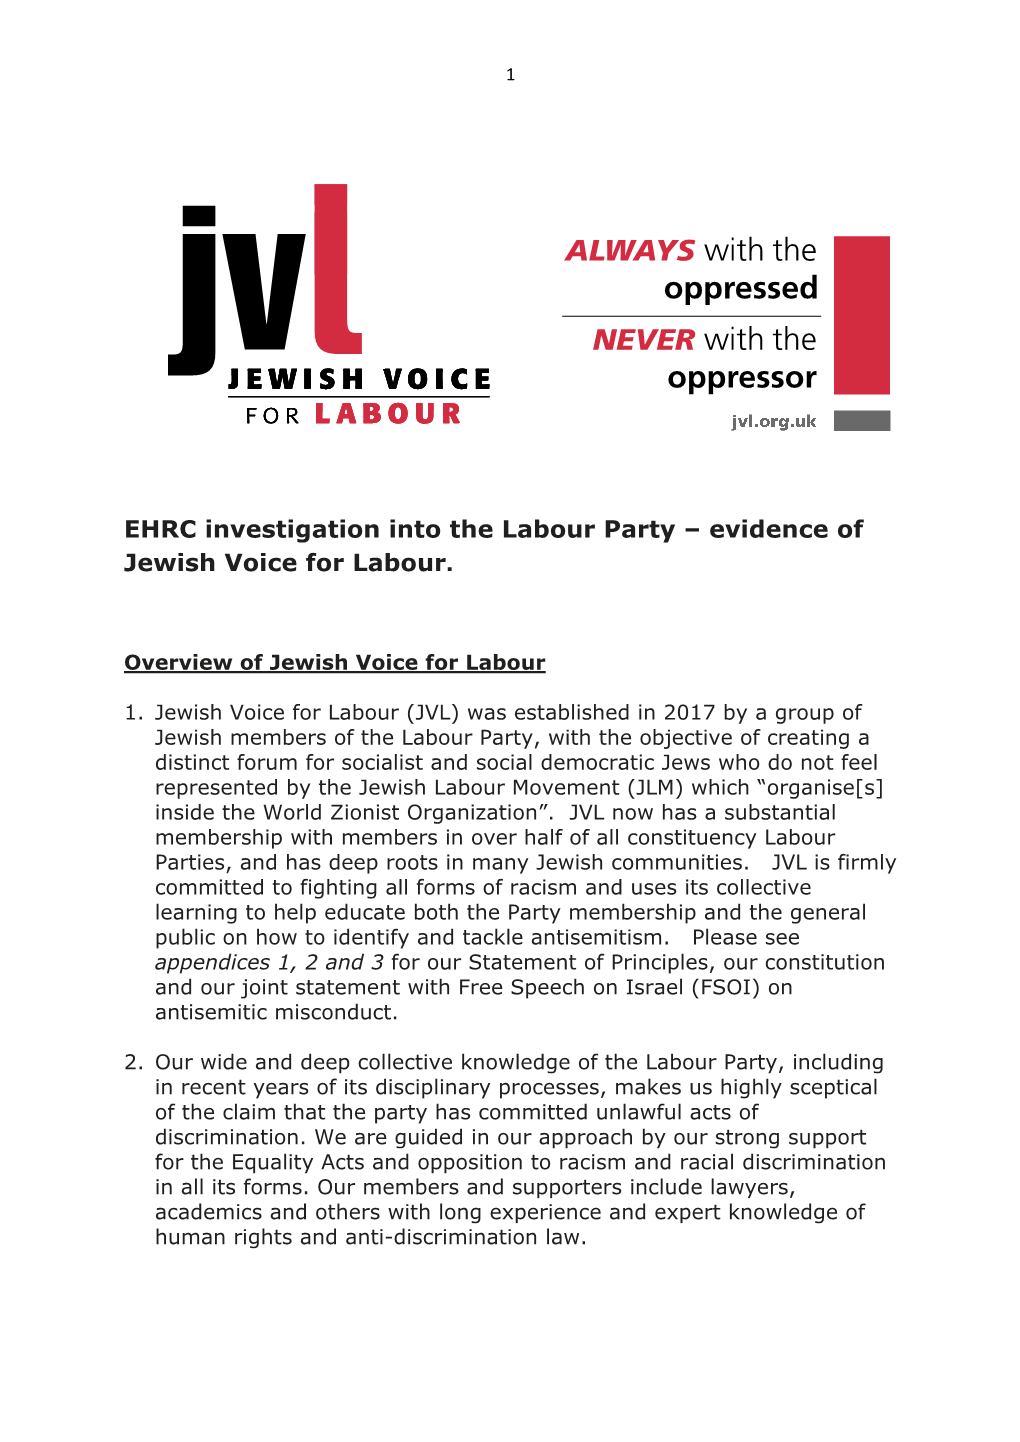 EHRC Investigation Into the Labour Party – Evidence of Jewish Voice for Labour